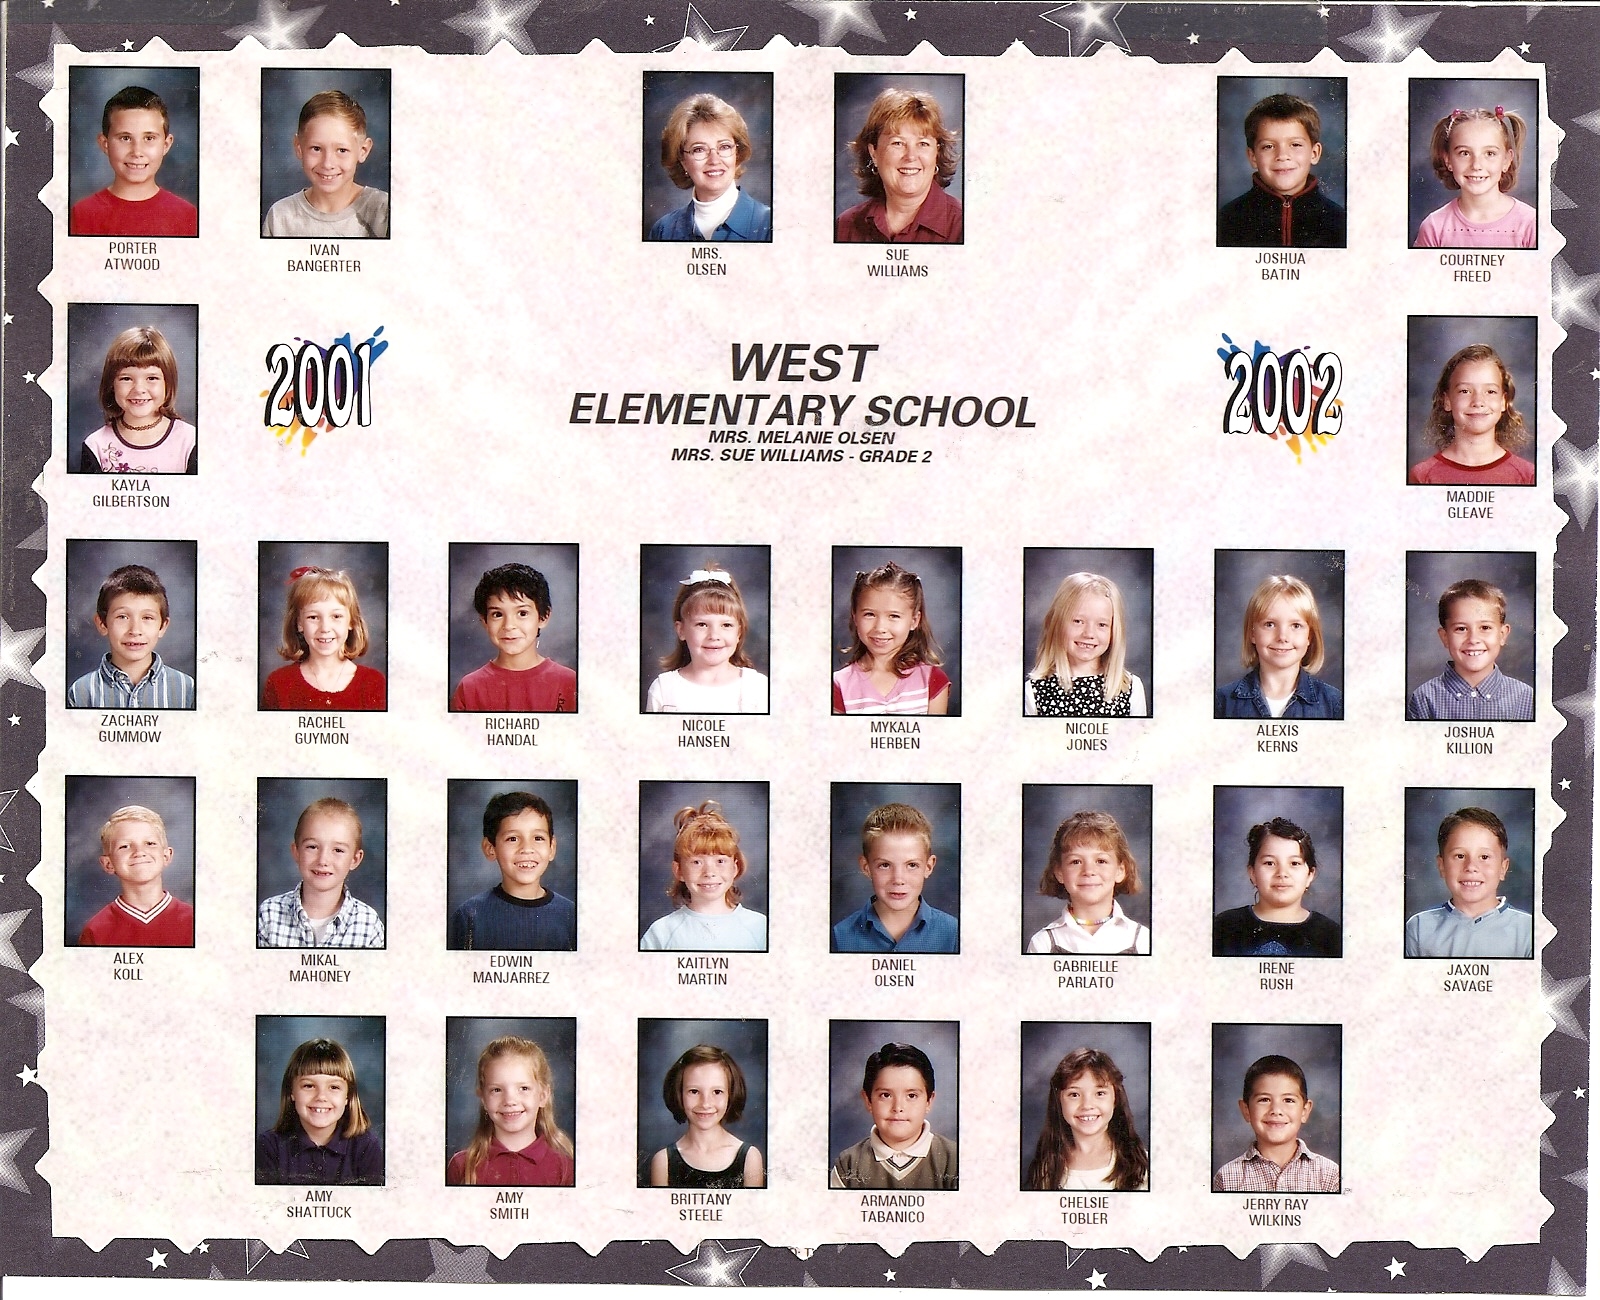 Mrs. Sue Williams' 2001-2002 second grade class at West Elementary School